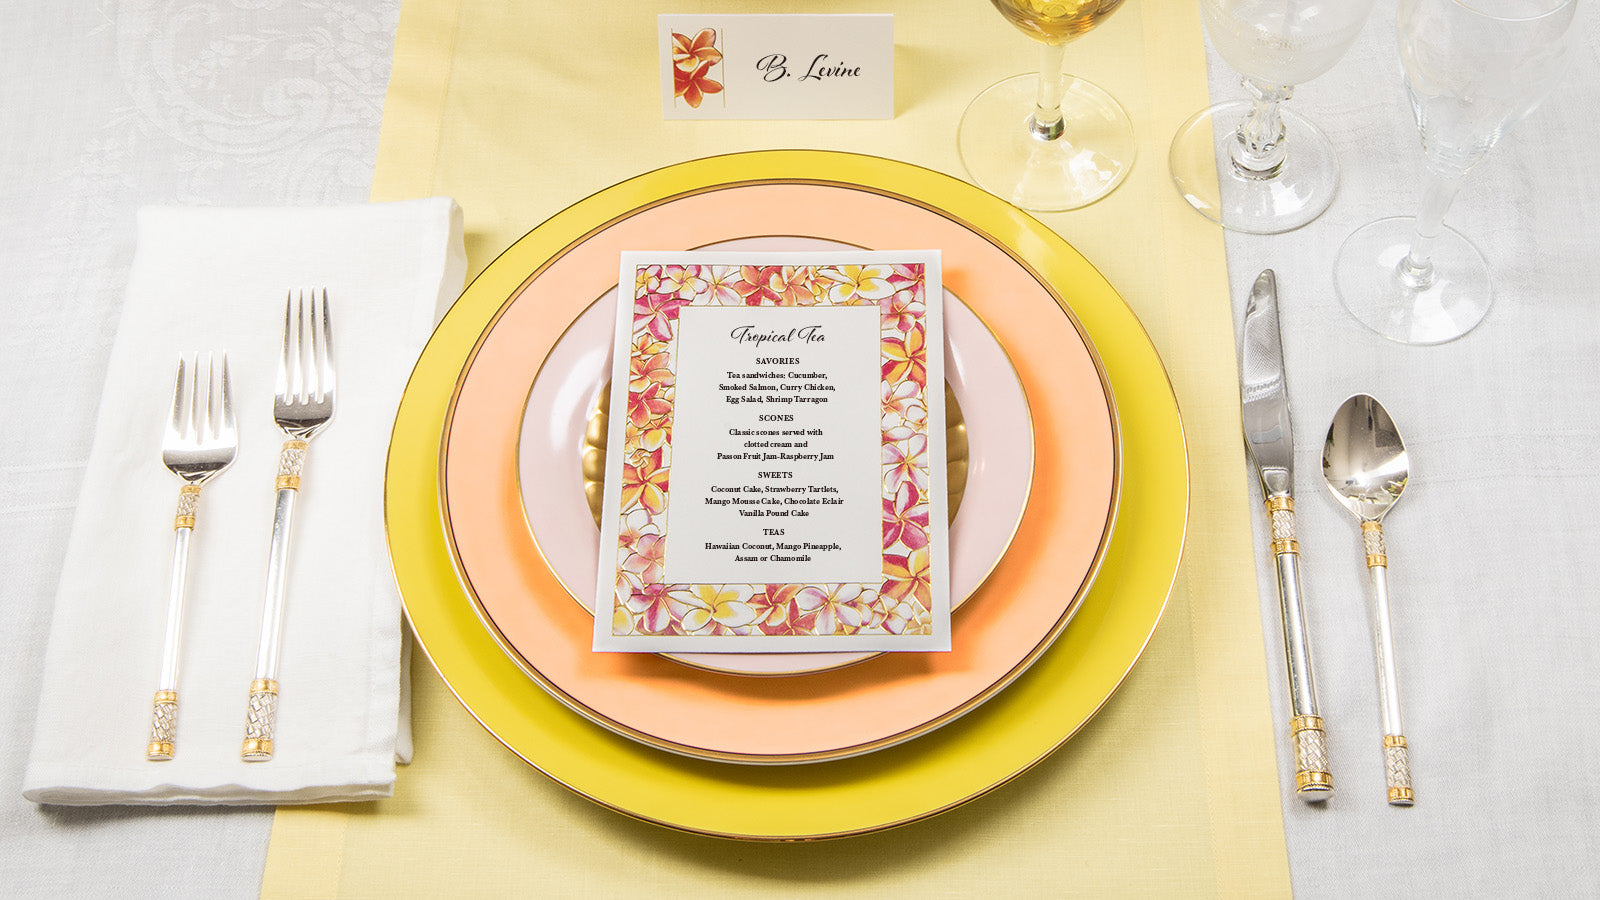 Hawaii Fine Stationers menu and placecard shown on placesetting